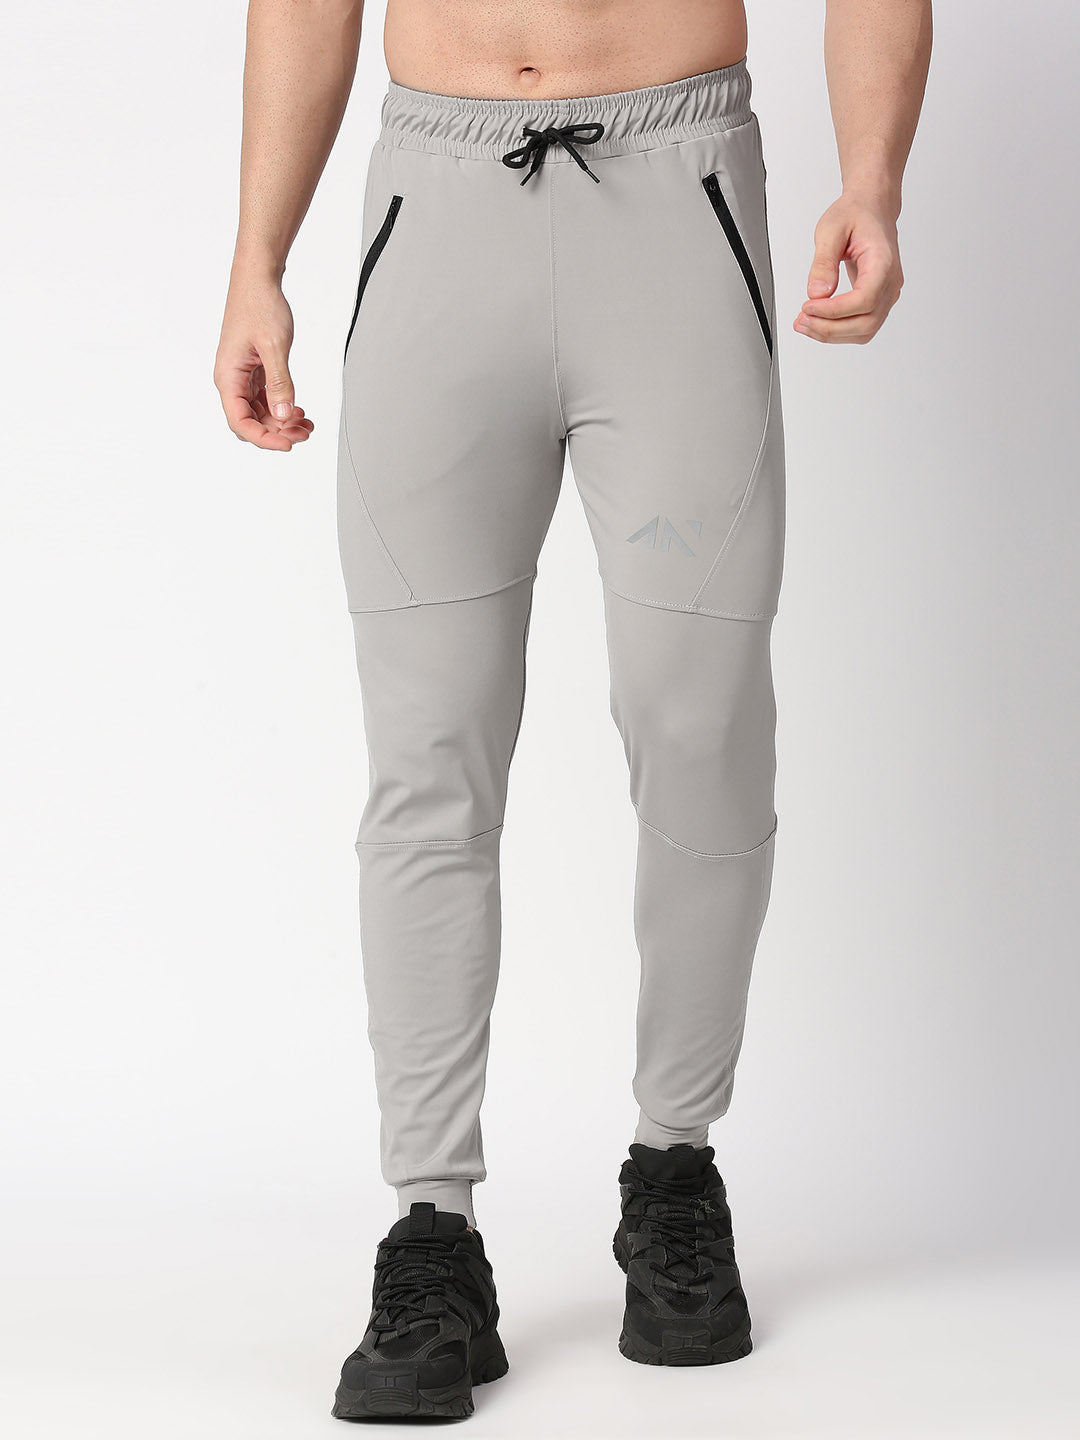 Buy Track Pants from top Brands at Best Prices Online in India  Tata CLiQ